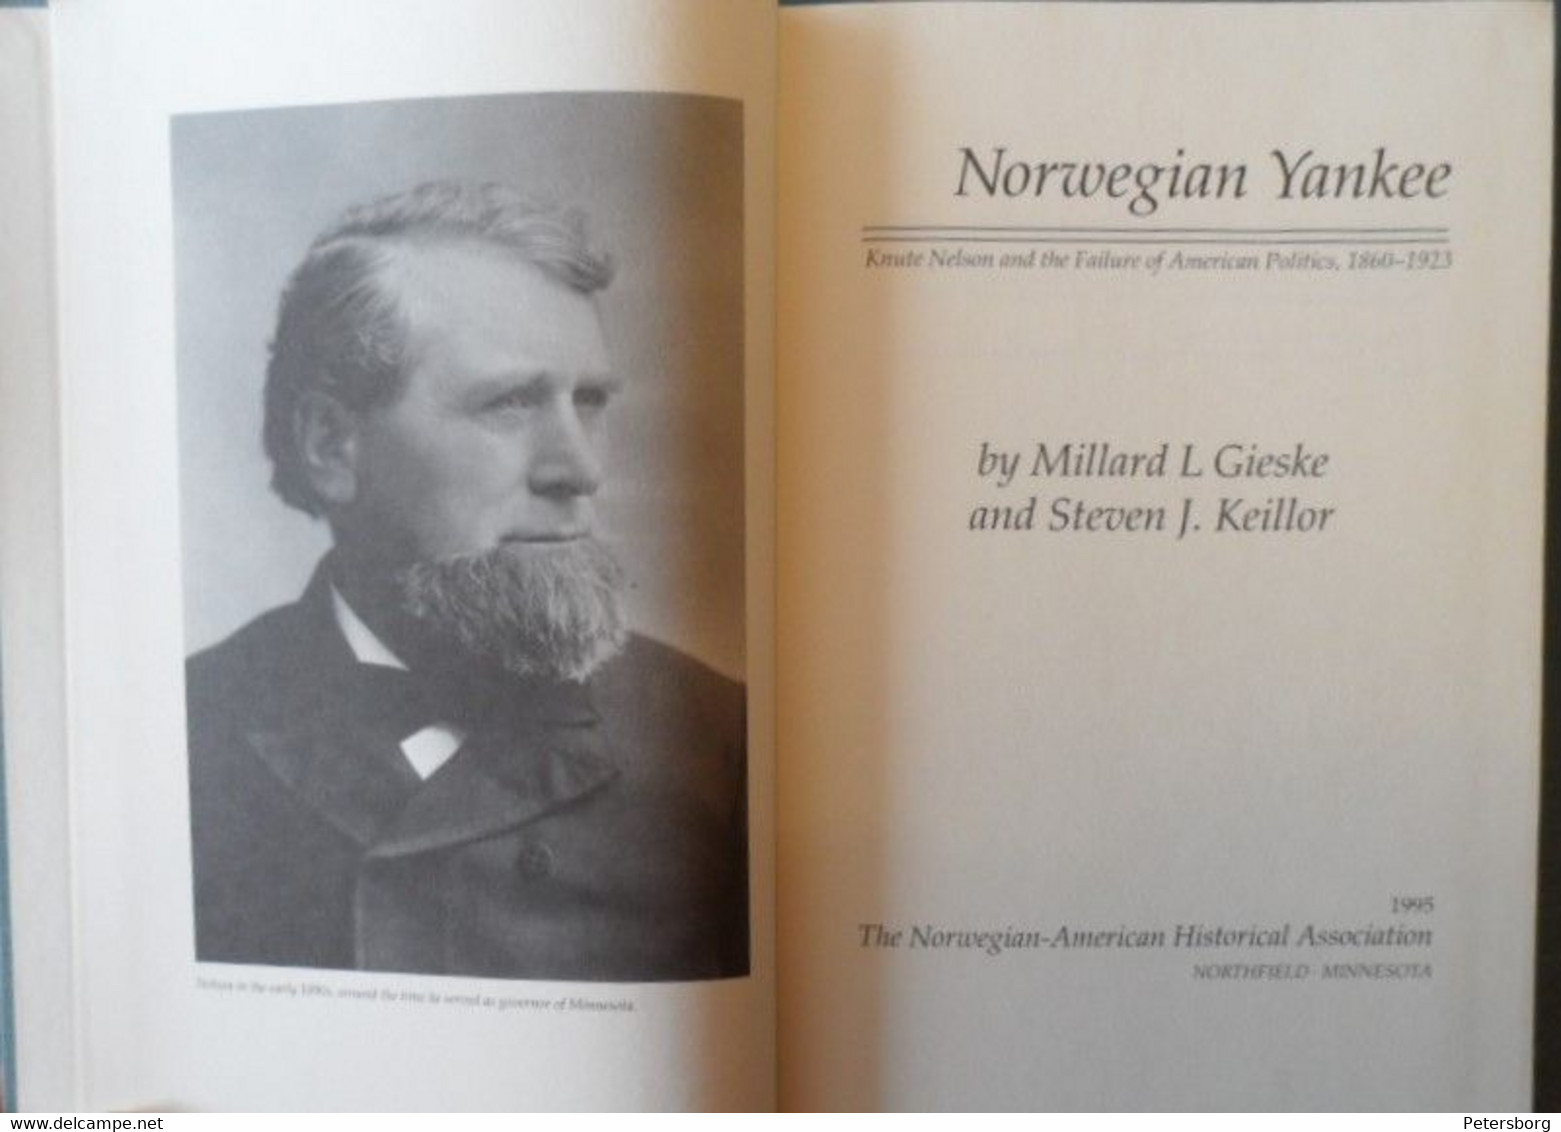 Norwegian Yankee: Knute Nelson And The Failure Of American Politics, 1860–1923 - Business